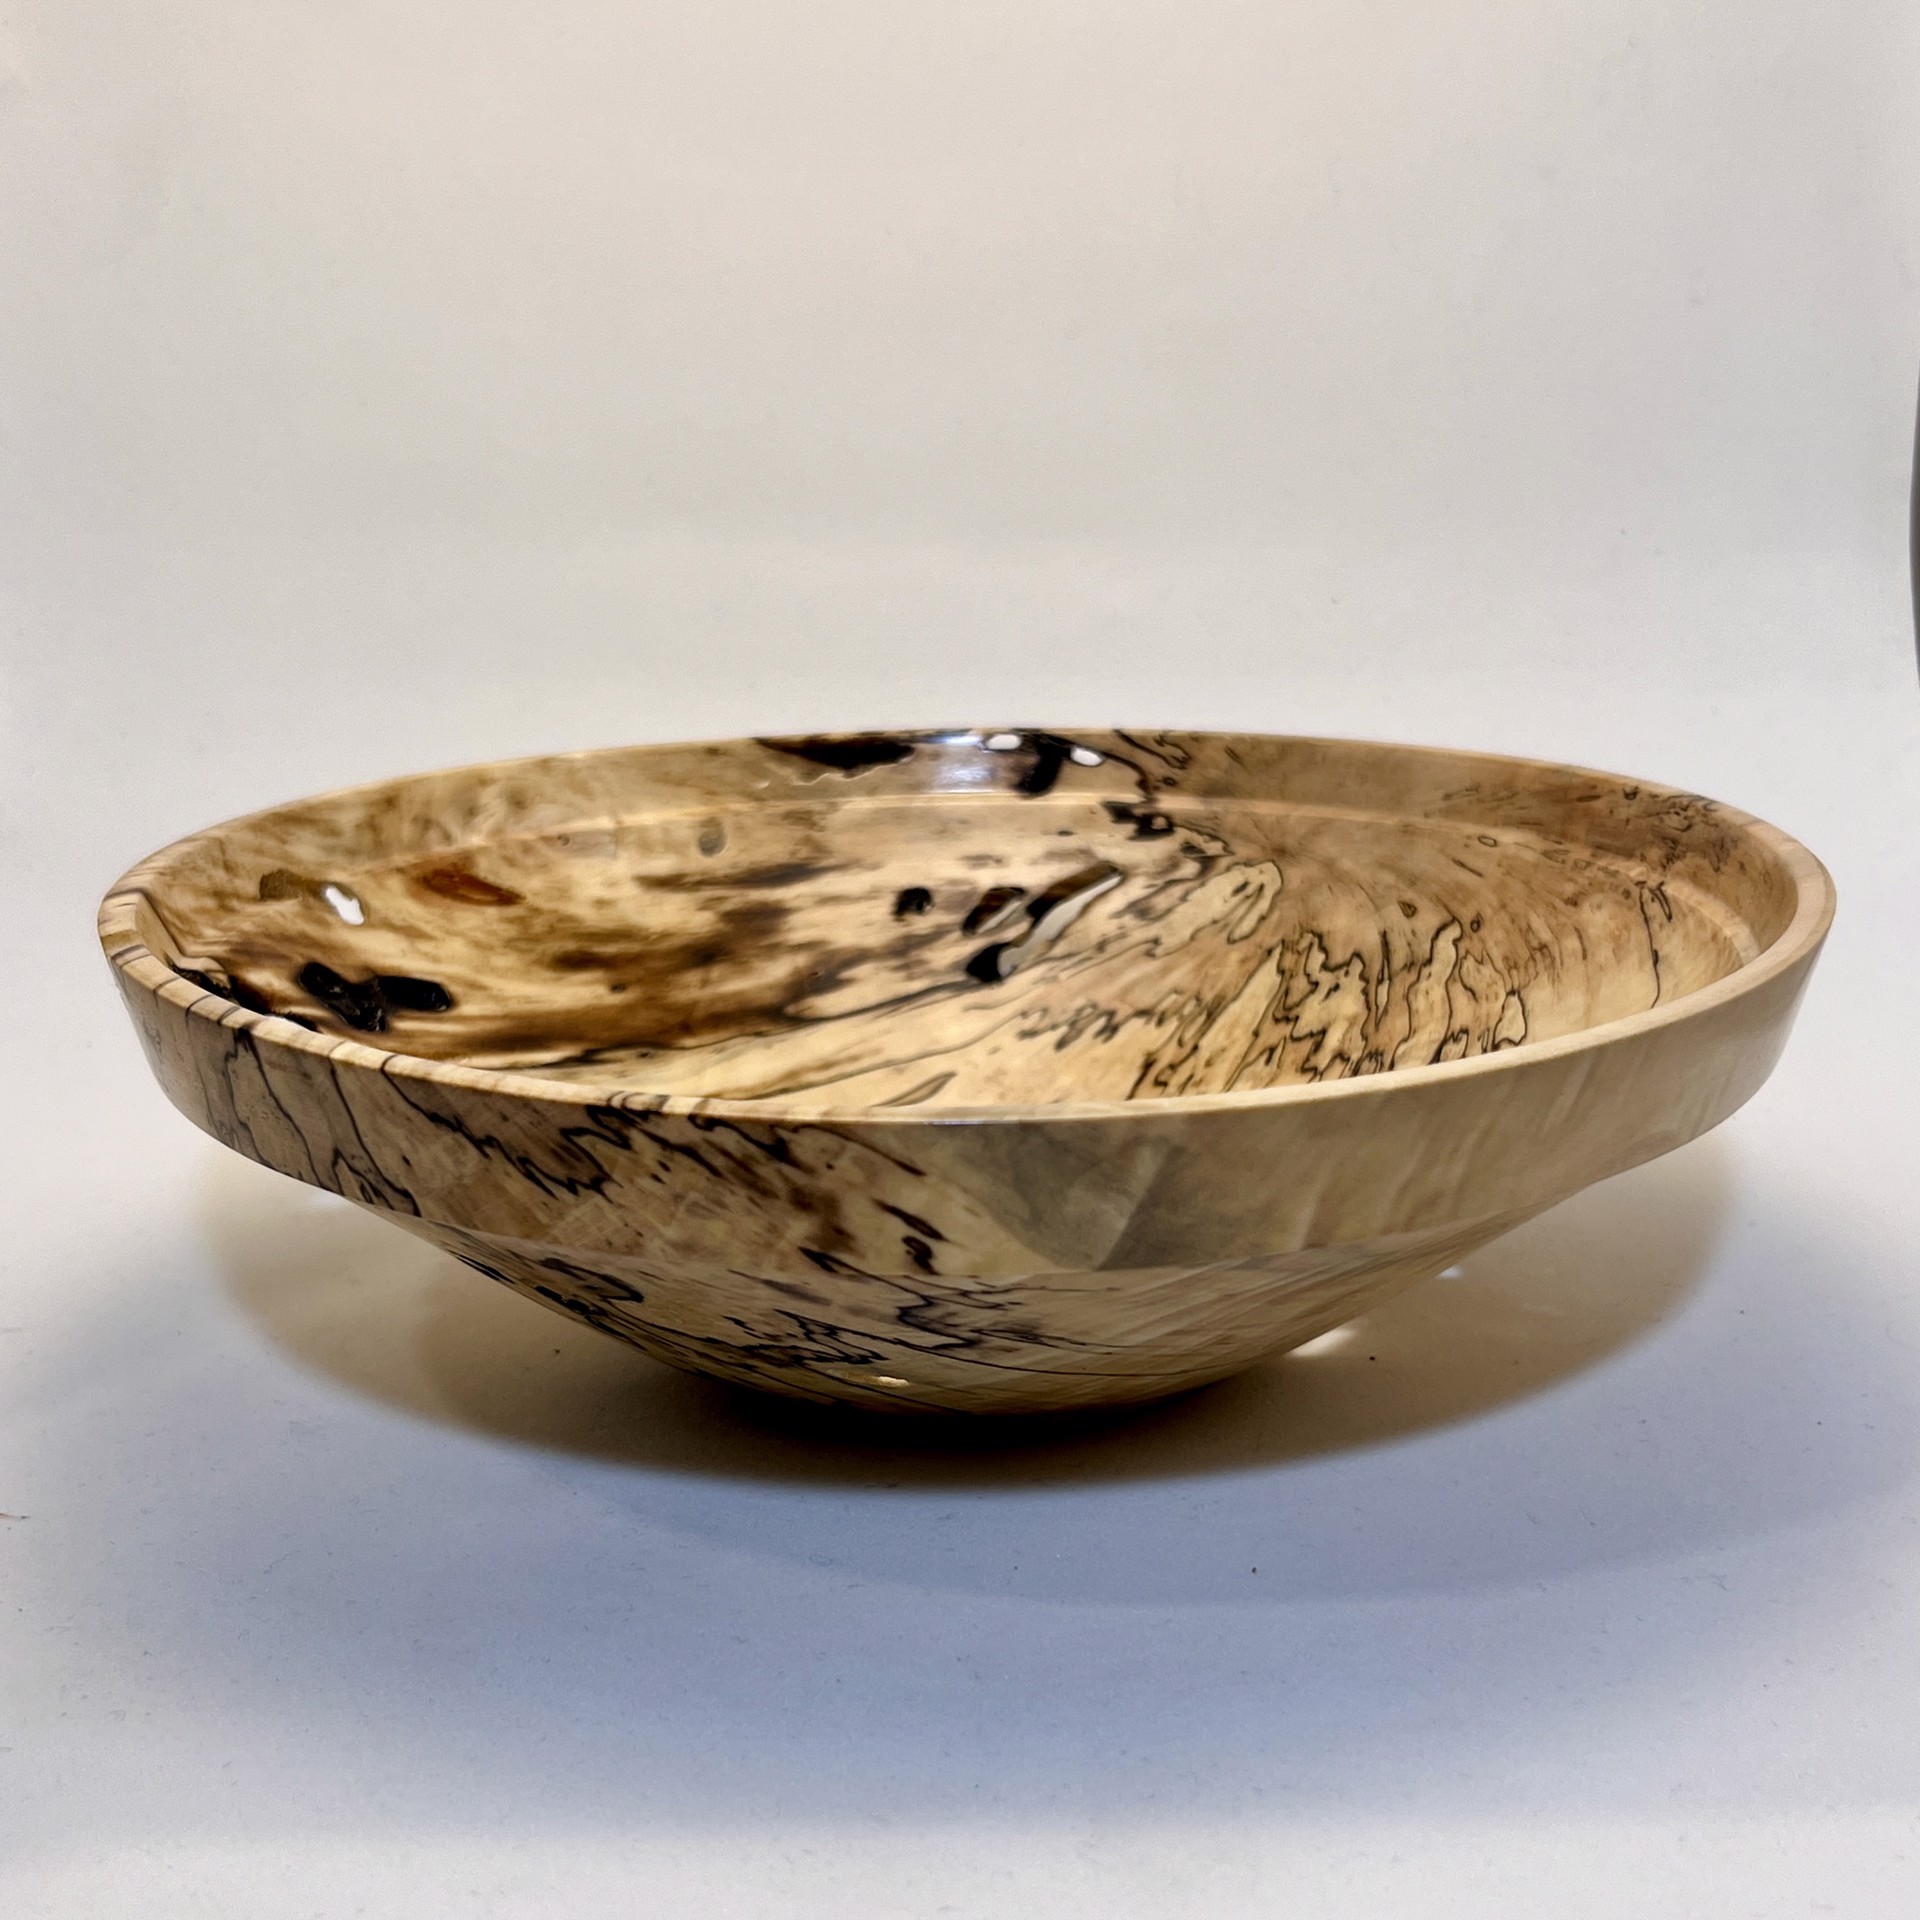 34. Curly Leaf Willow Bowl by Don Kaiser